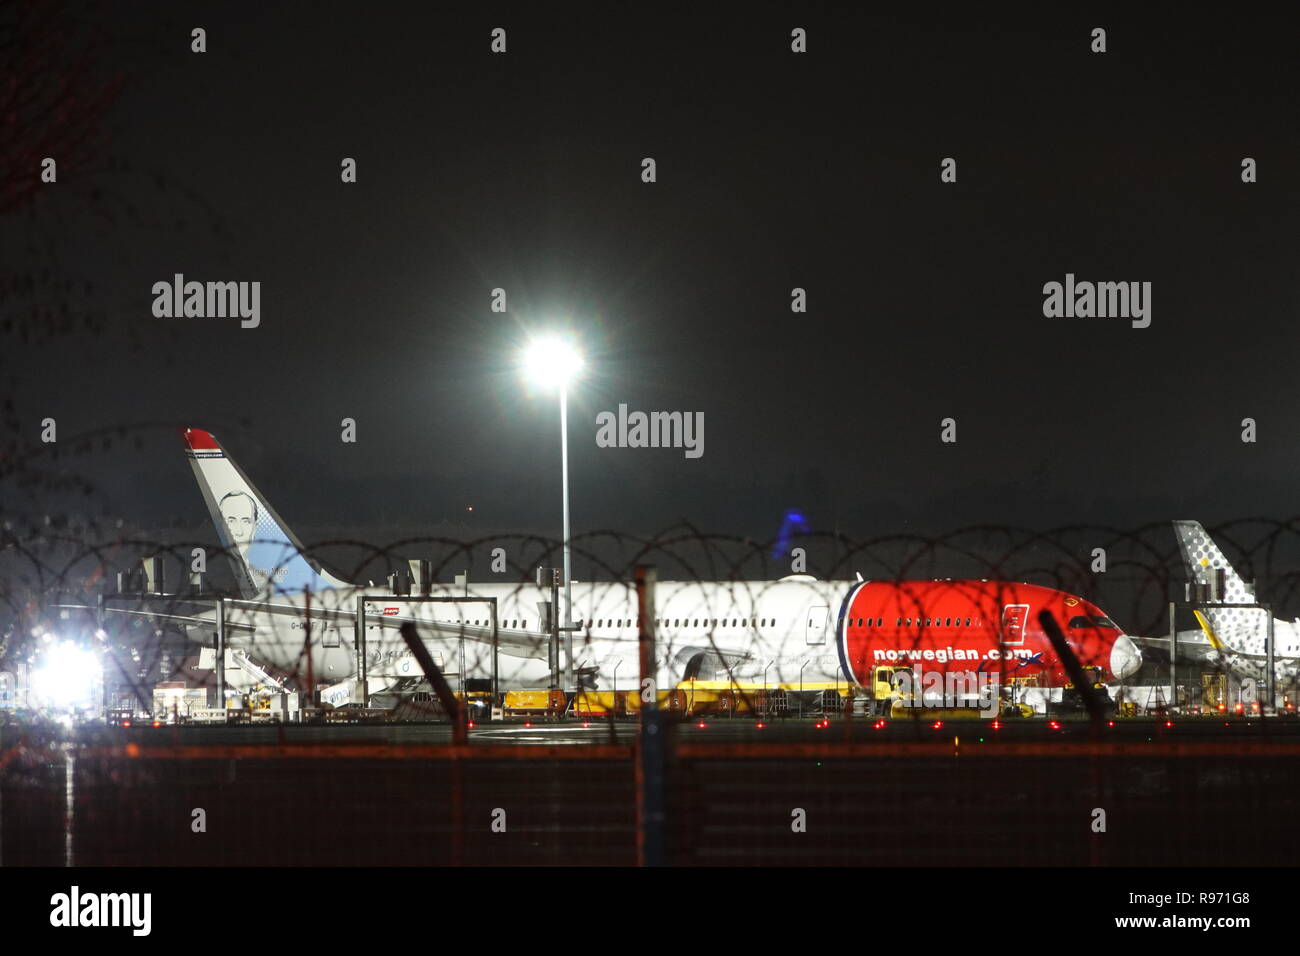 London Gatwick, UK. 20th December, 2018. Passenger jet airplanes grounded at Gatwick Airport on Thursday night, as drone activity causes the airport to close for over 24 hours. Credit: Andy Stehrenberger/Alamy Live News Stock Photo